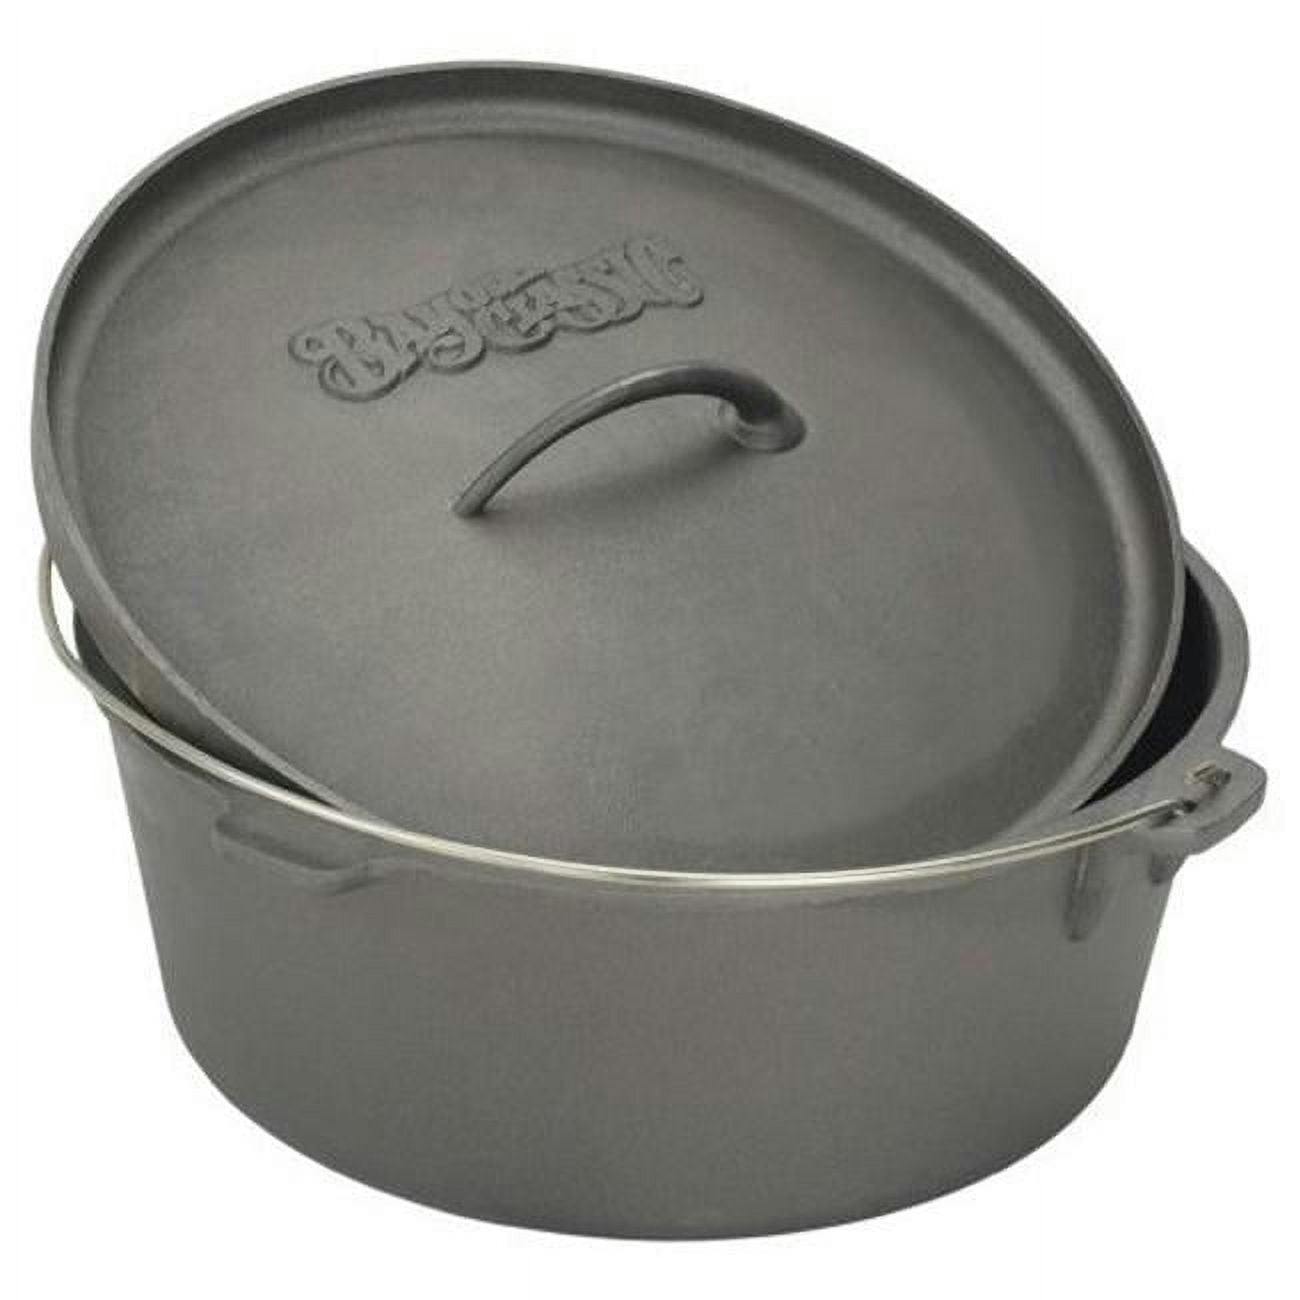 Rustic 4-Quart Cast Iron Dutch Oven for Slow Cooking